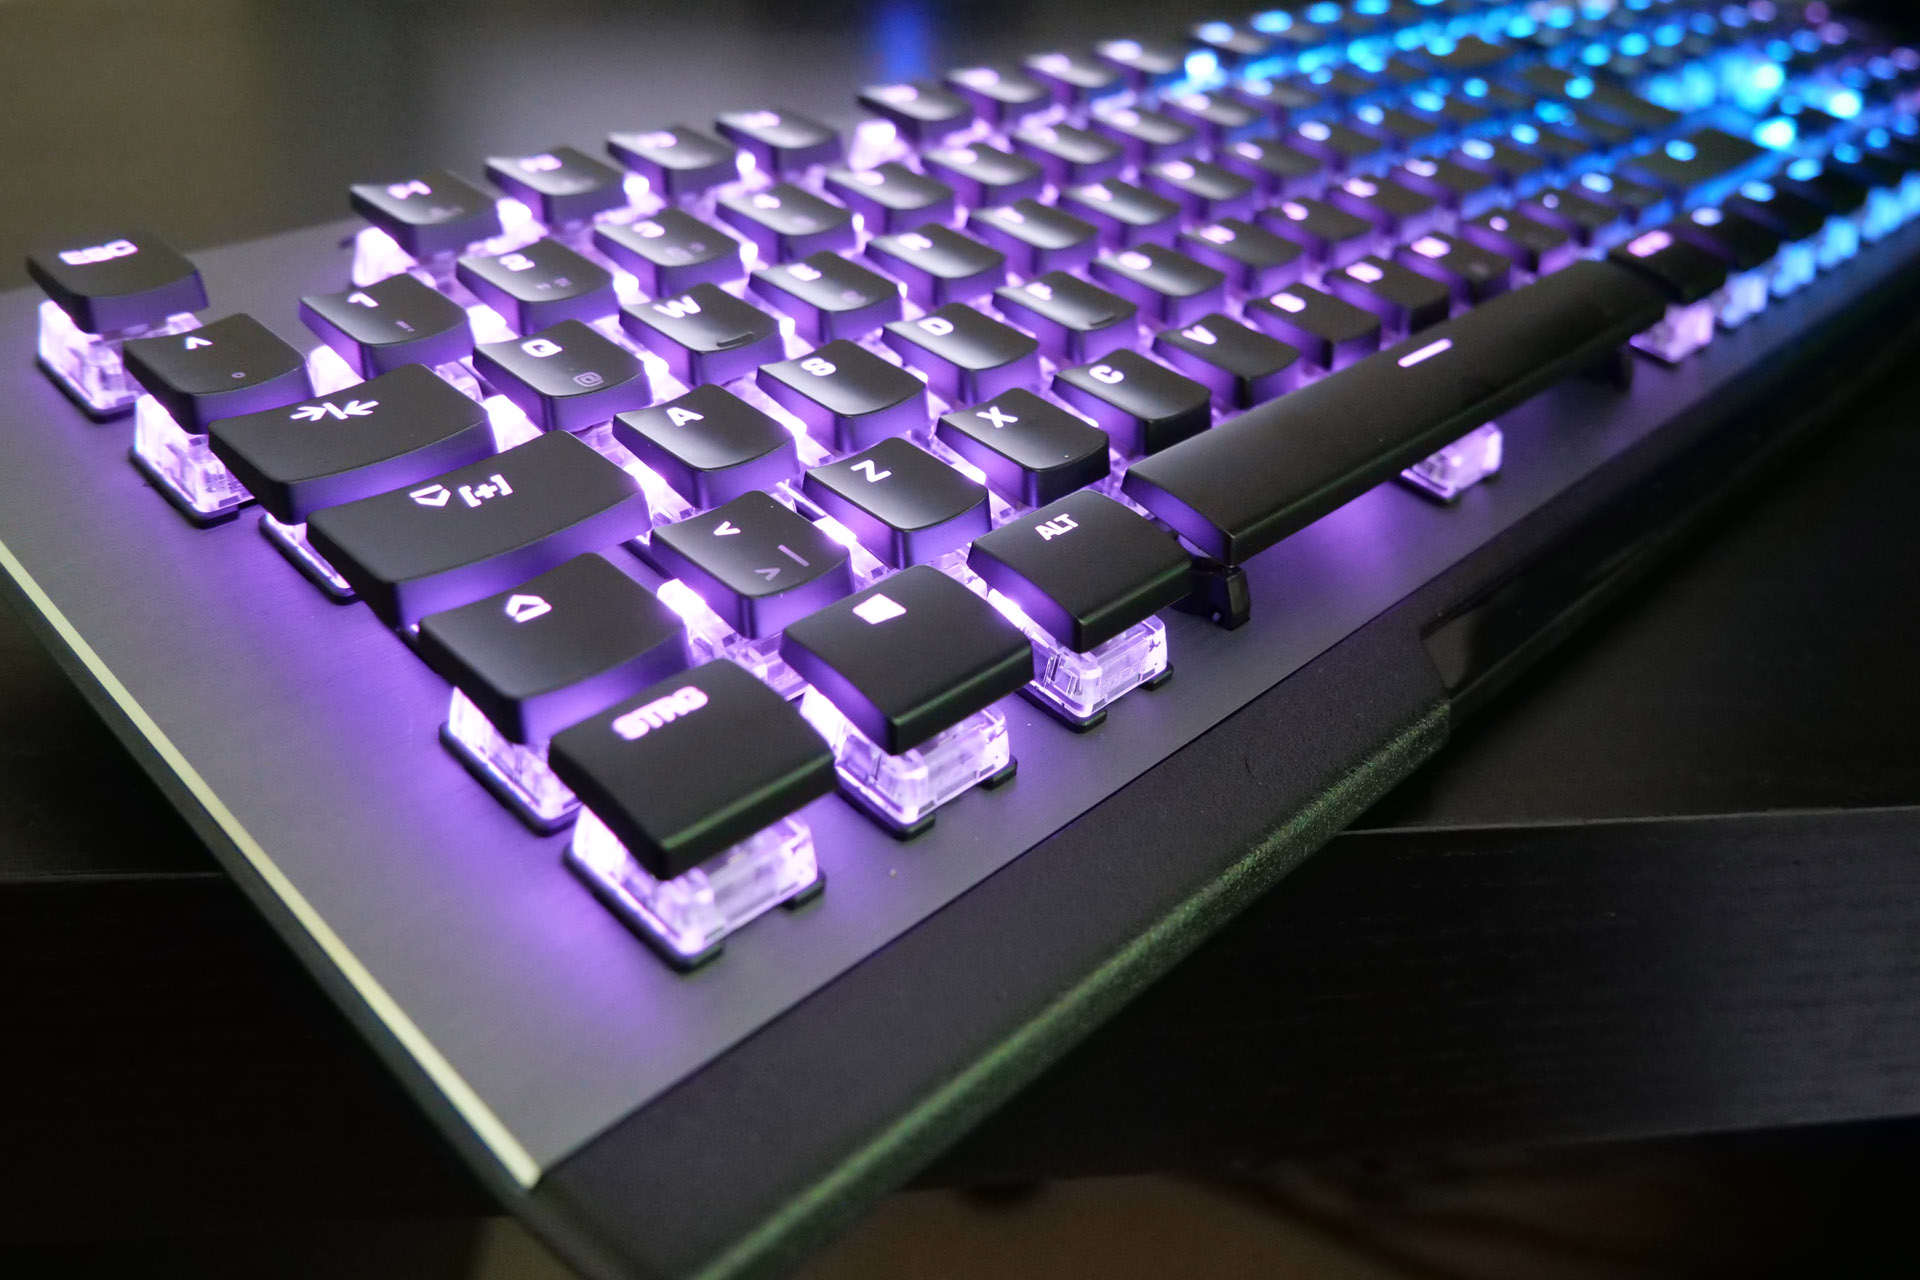 How Do You Find The Best Gaming Keyboard Today?